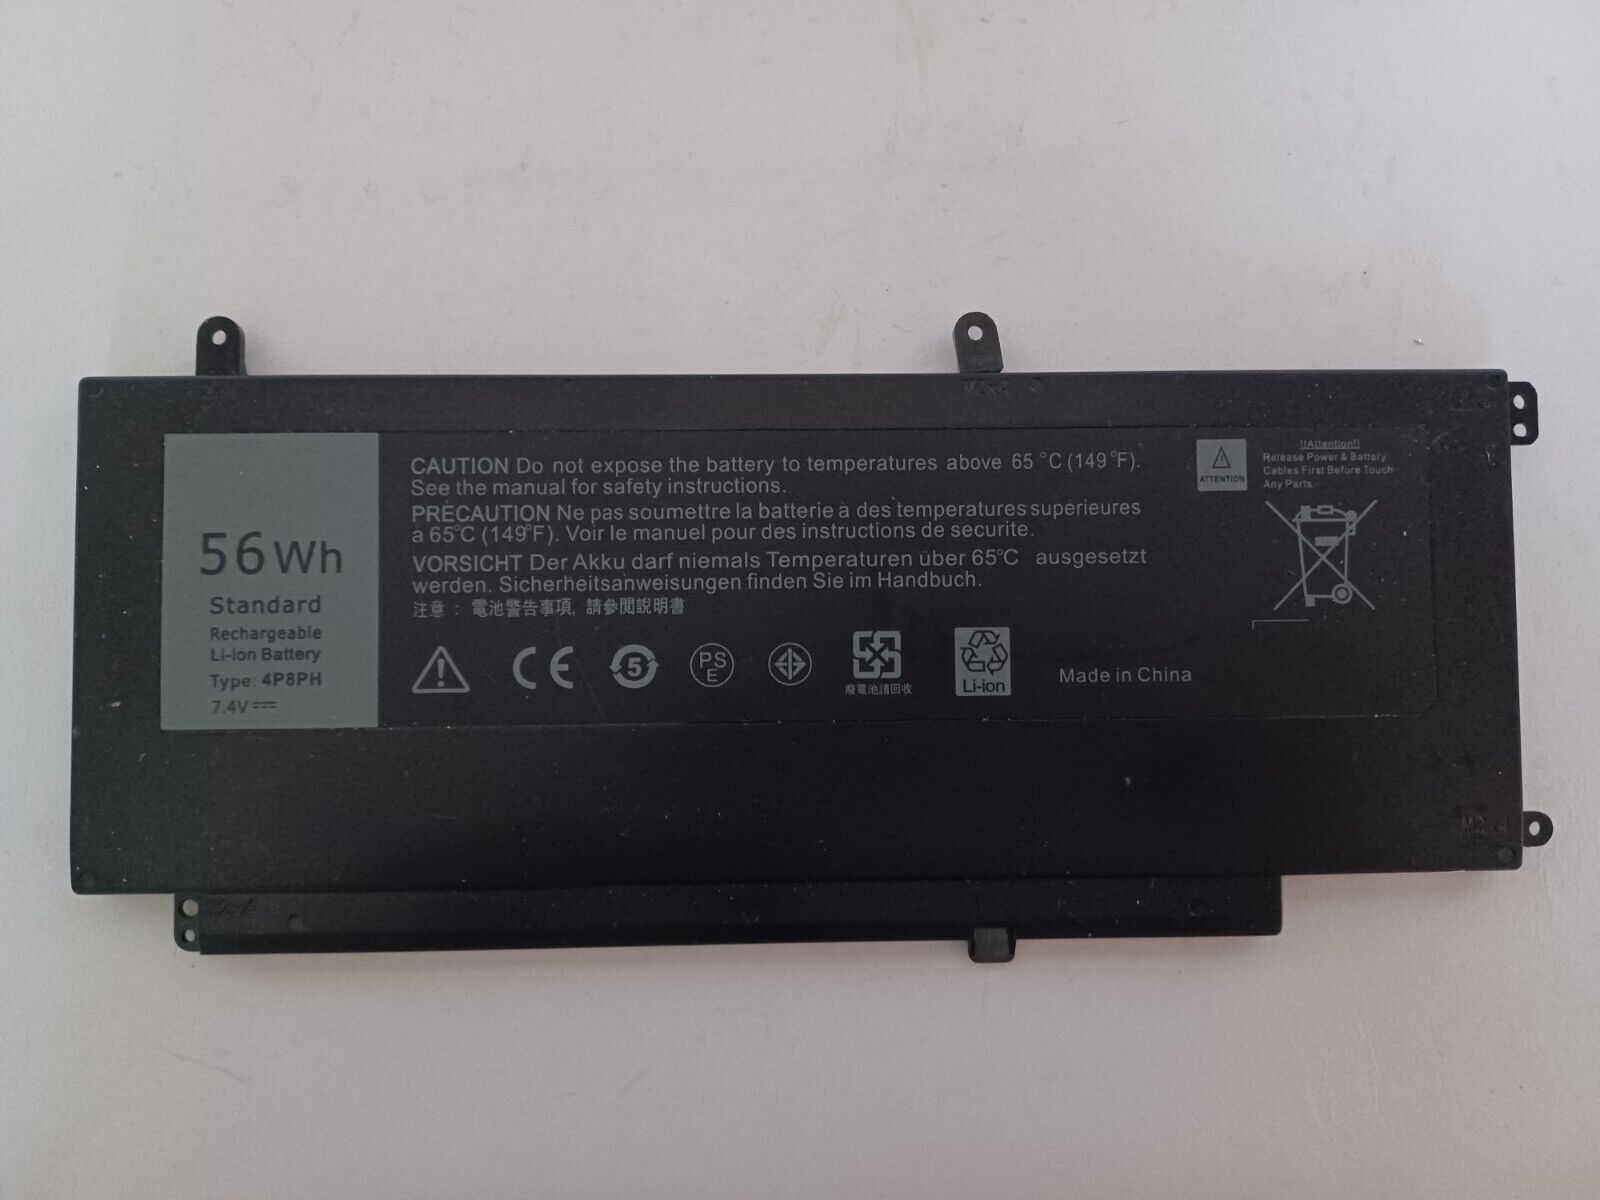 56 Wh Standard Rechargeable Li-ion Battery